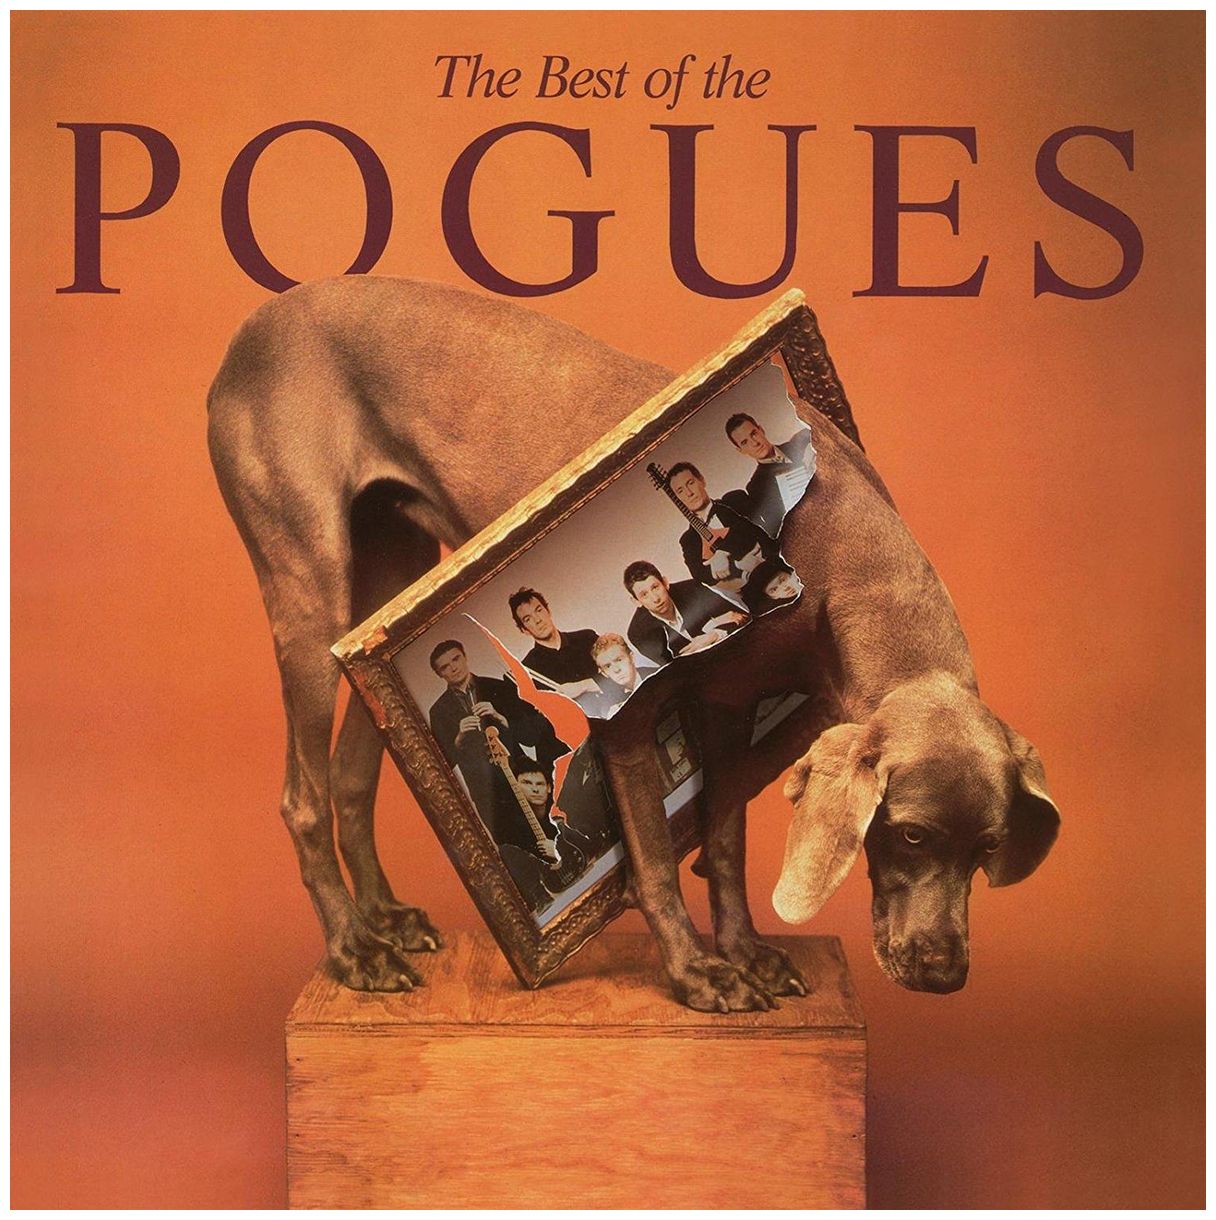 The Pogues - The Best of The Pogues 